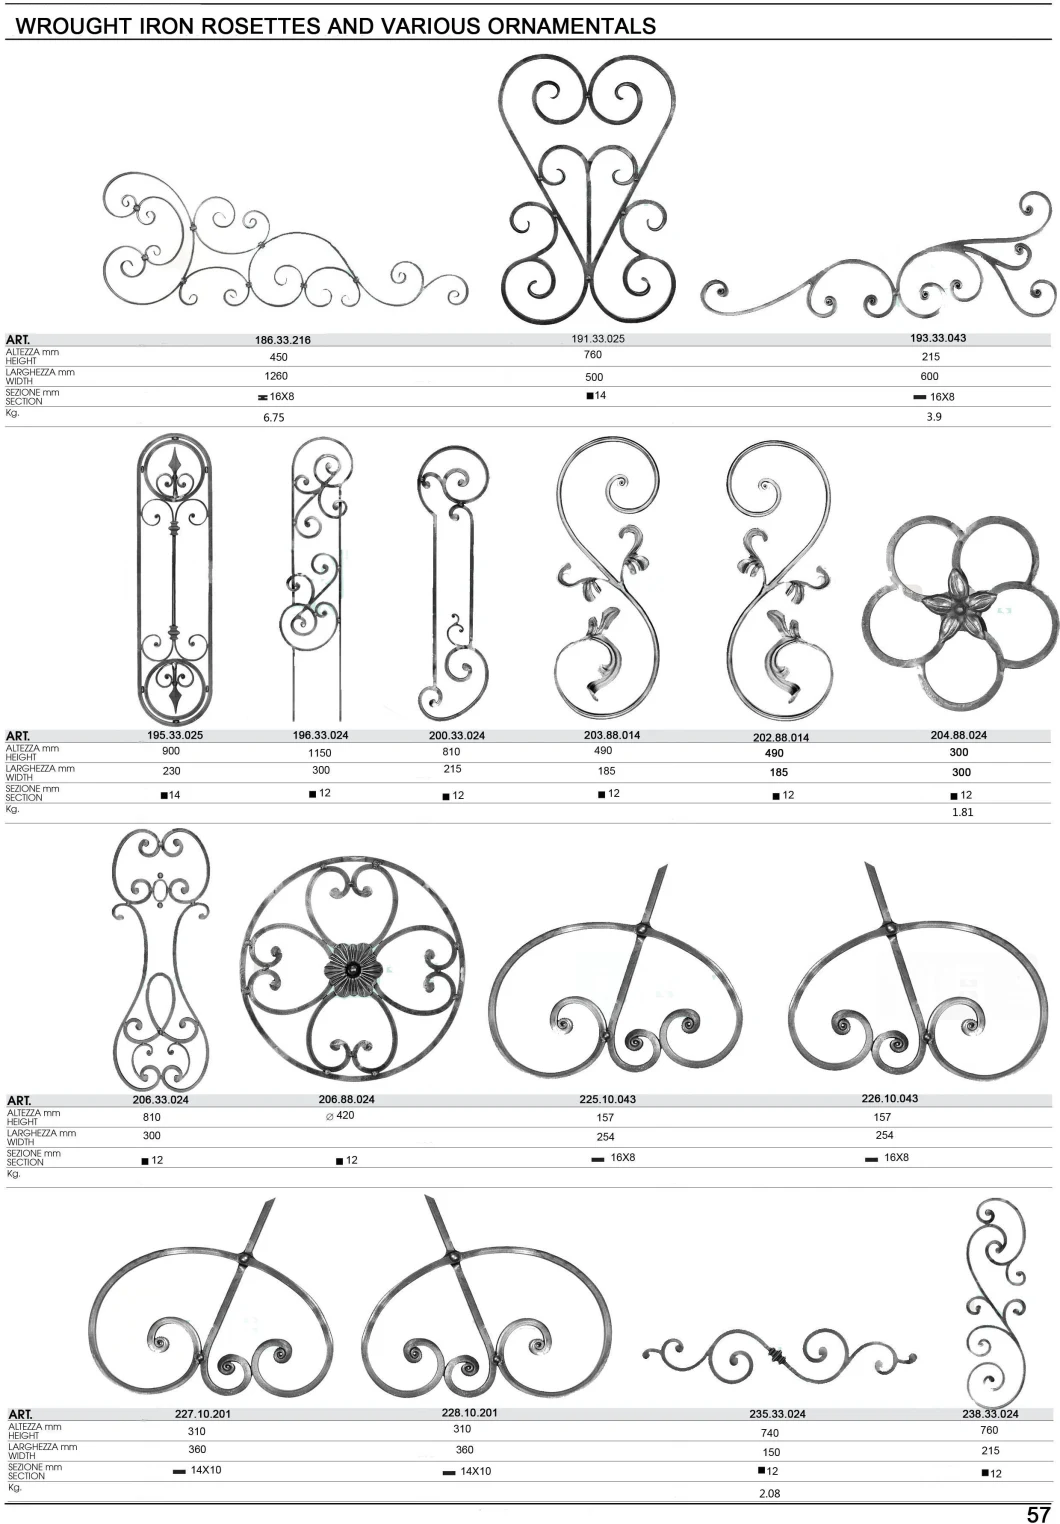 Creative Stair Parts Powder-Coated Wrought Iron Single Basket Baluster